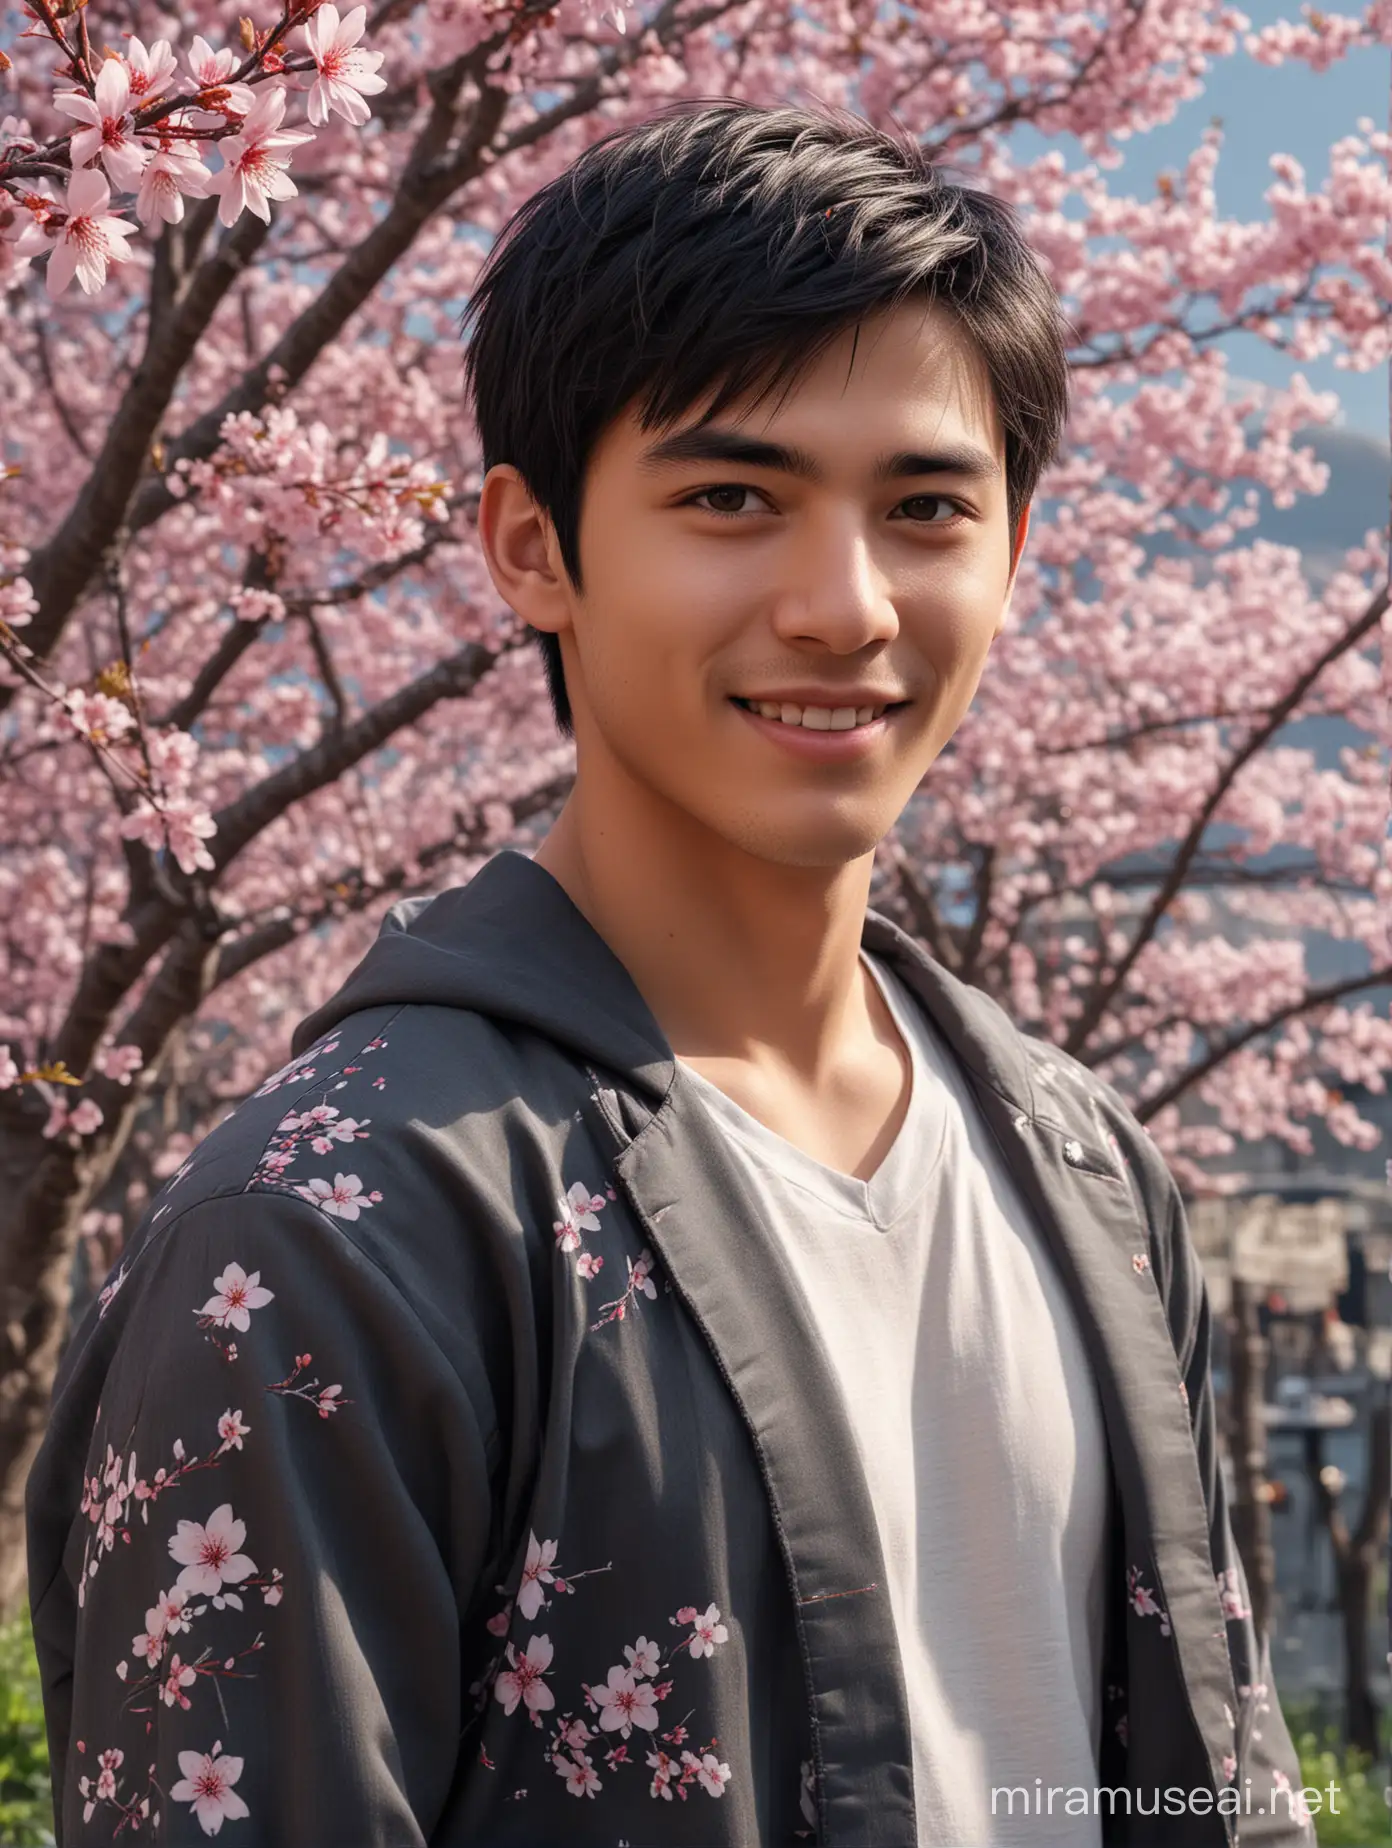 Handsome Young Man Smiling Under Sakura Blossoms in HDR Photography